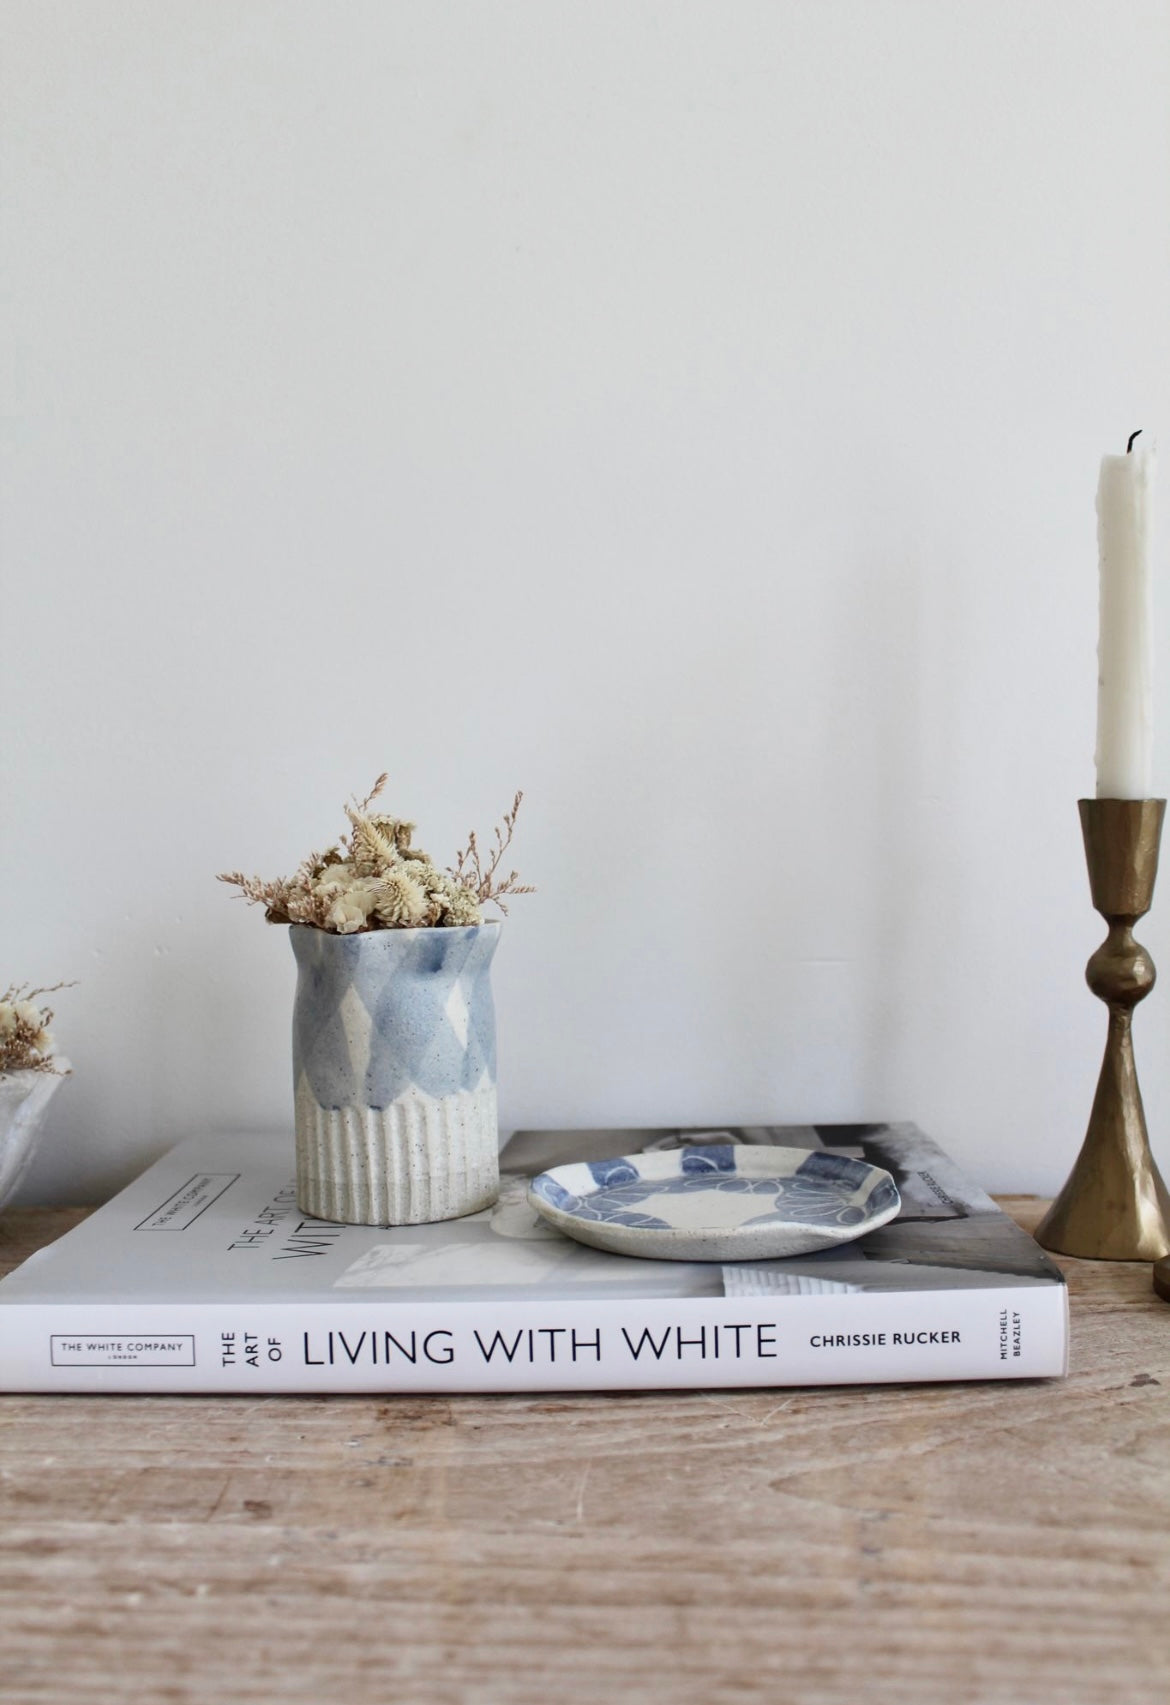 The Art of Living With White